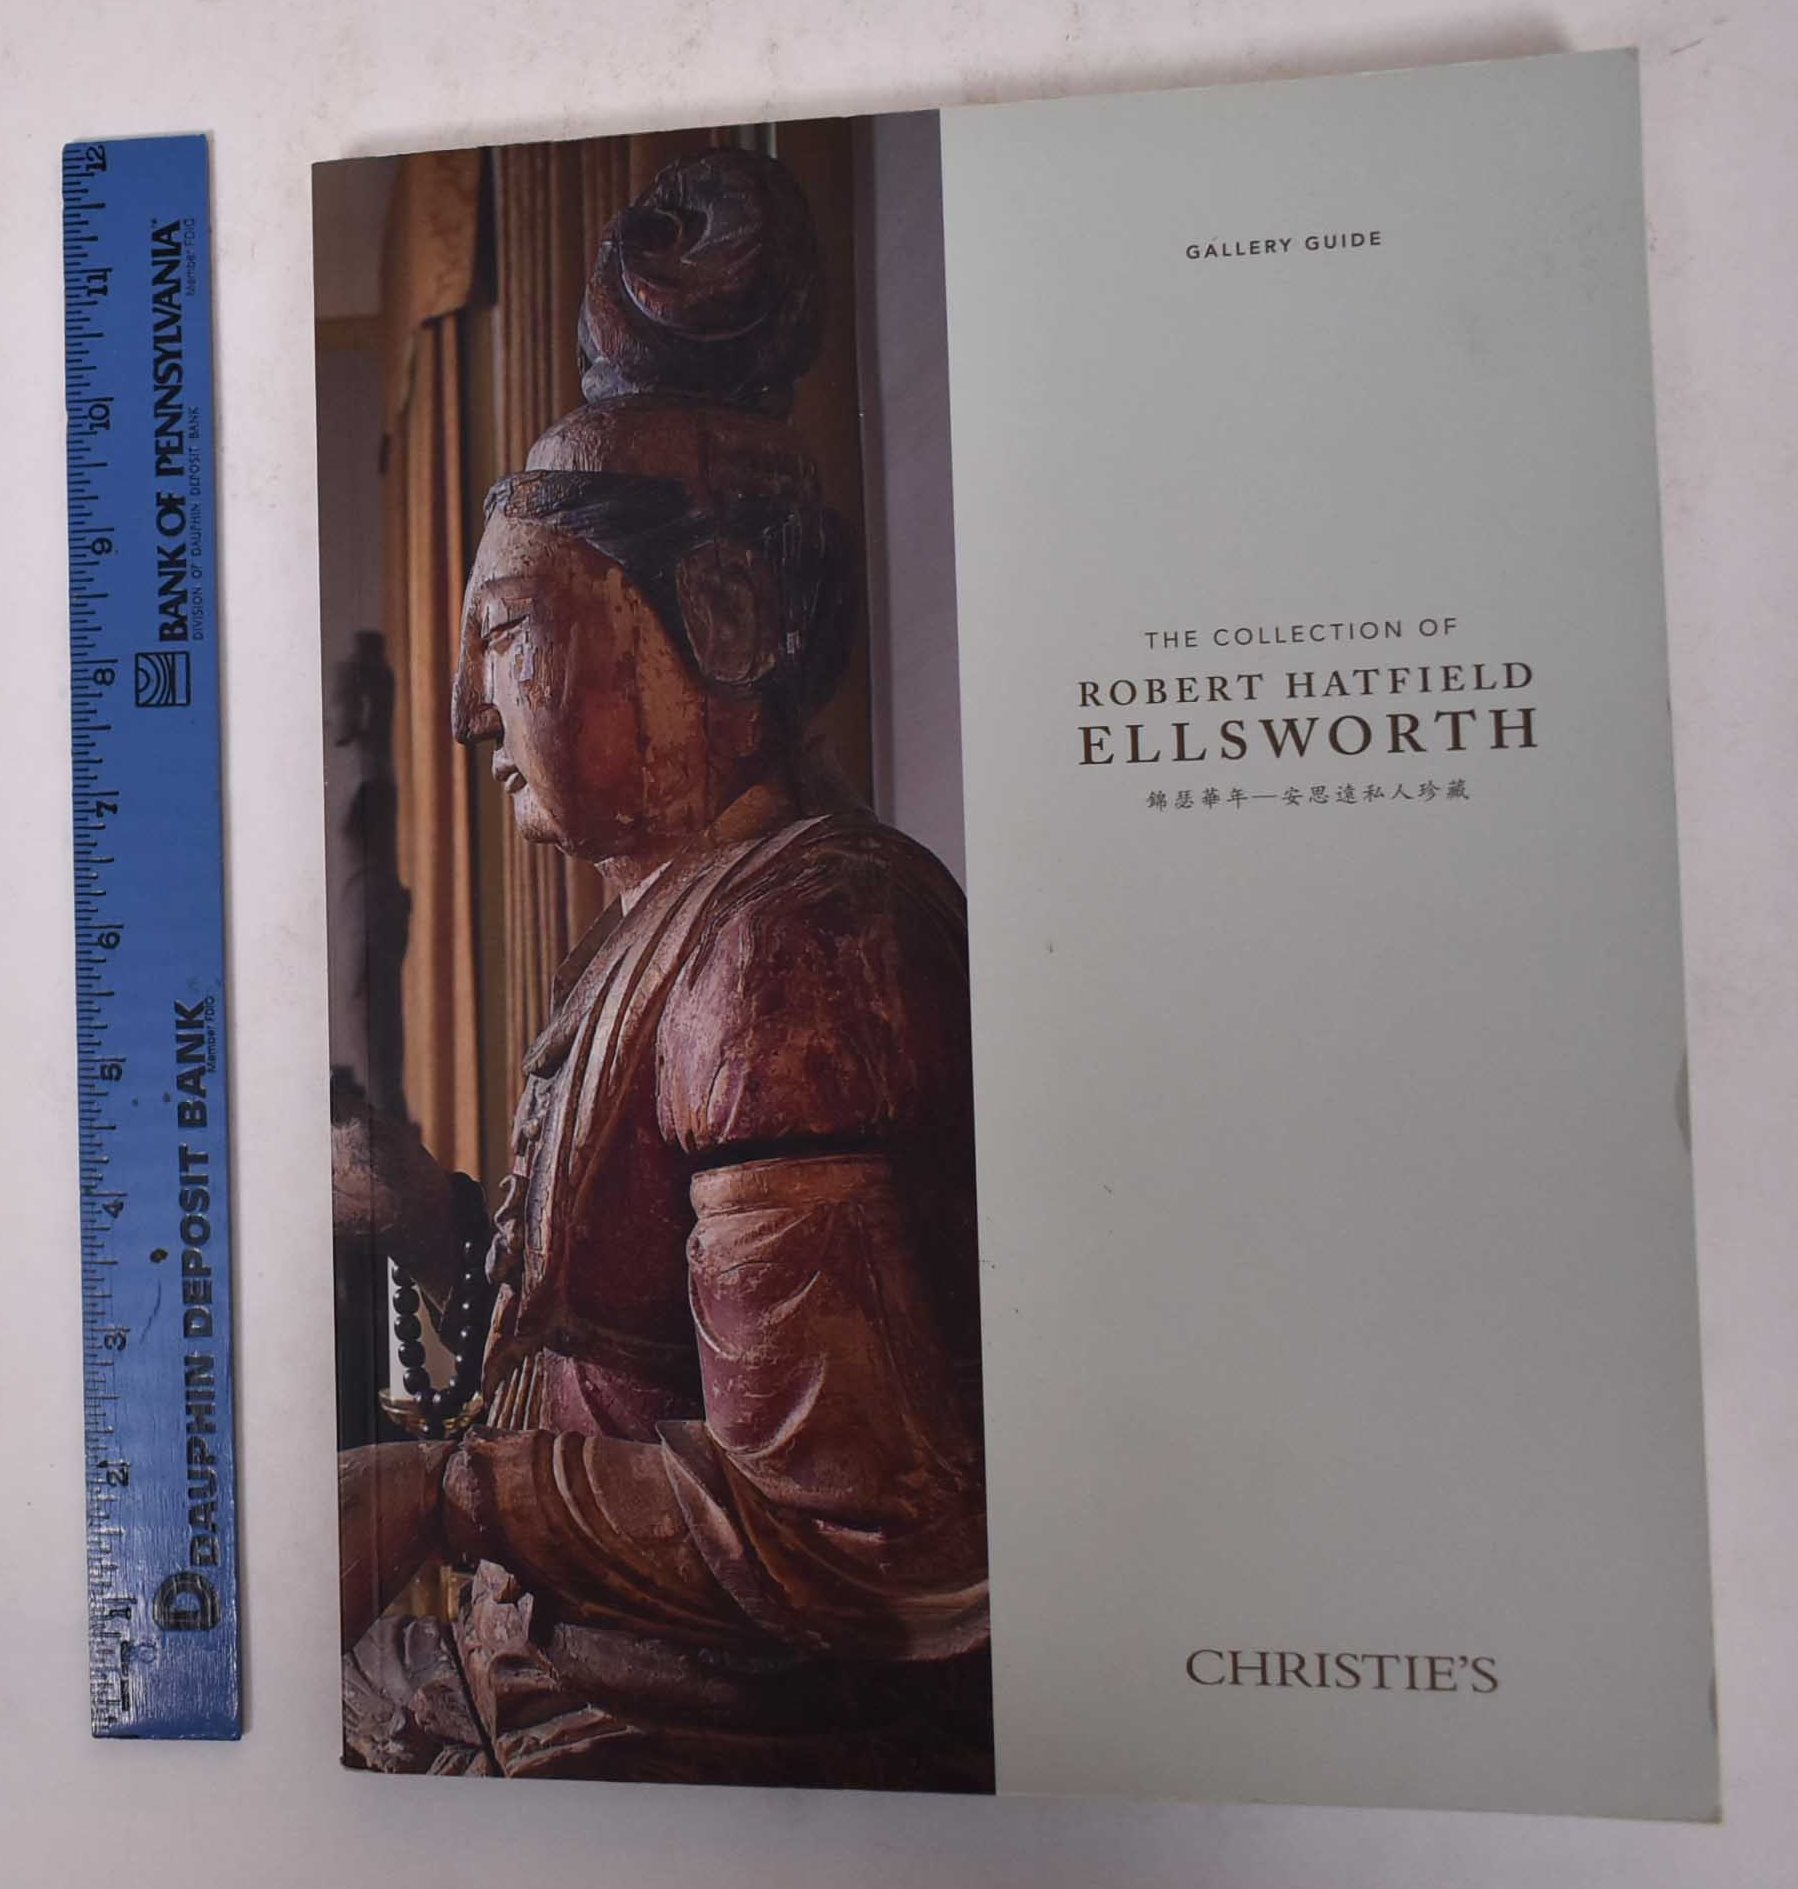 The Collection of Robert Hatfield Ellsworth GALLERY GUIDE